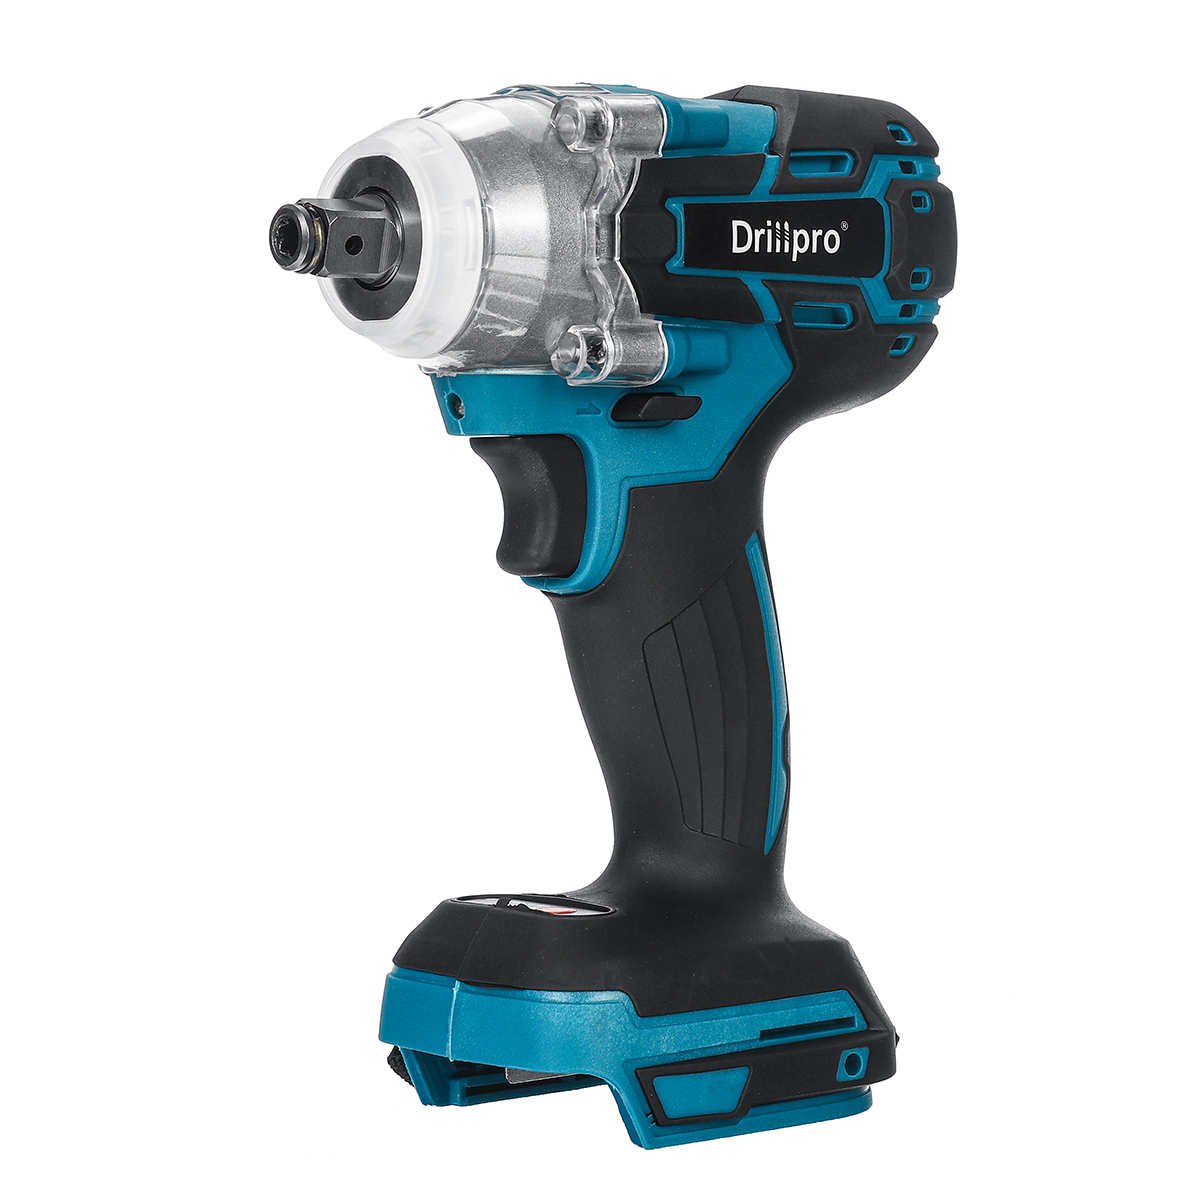 Drillpro 18V Cordless Brushless Impact Wrench Screwdriver Stepless Speed Change Switch Adapted To 18V Makita battery